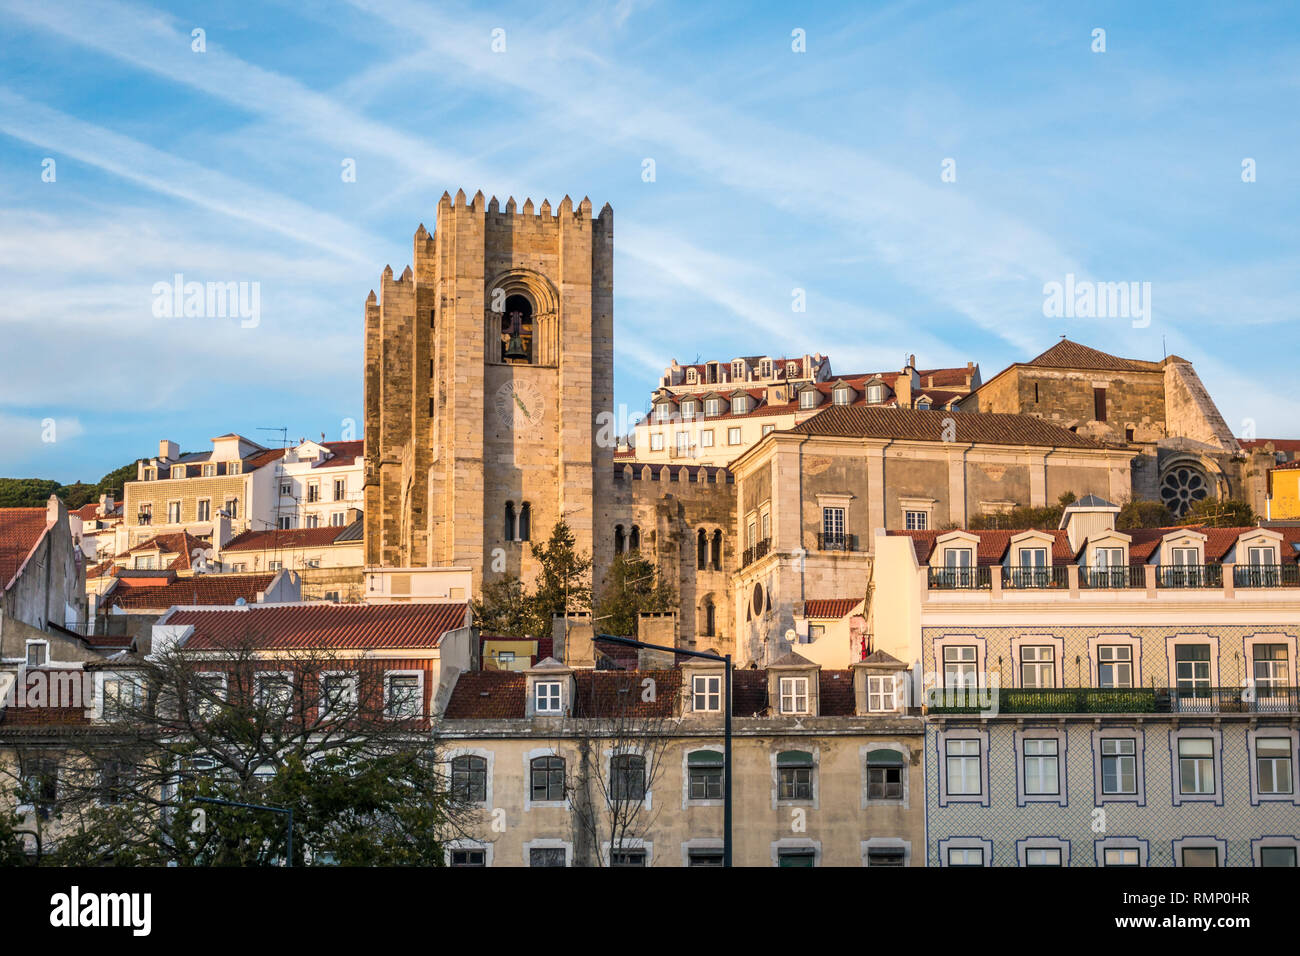 Street view of Alfama neighbourhood in Lisbon Portugal with the Sé cathedral rising up above neighboring apartment buildings Stock Photo